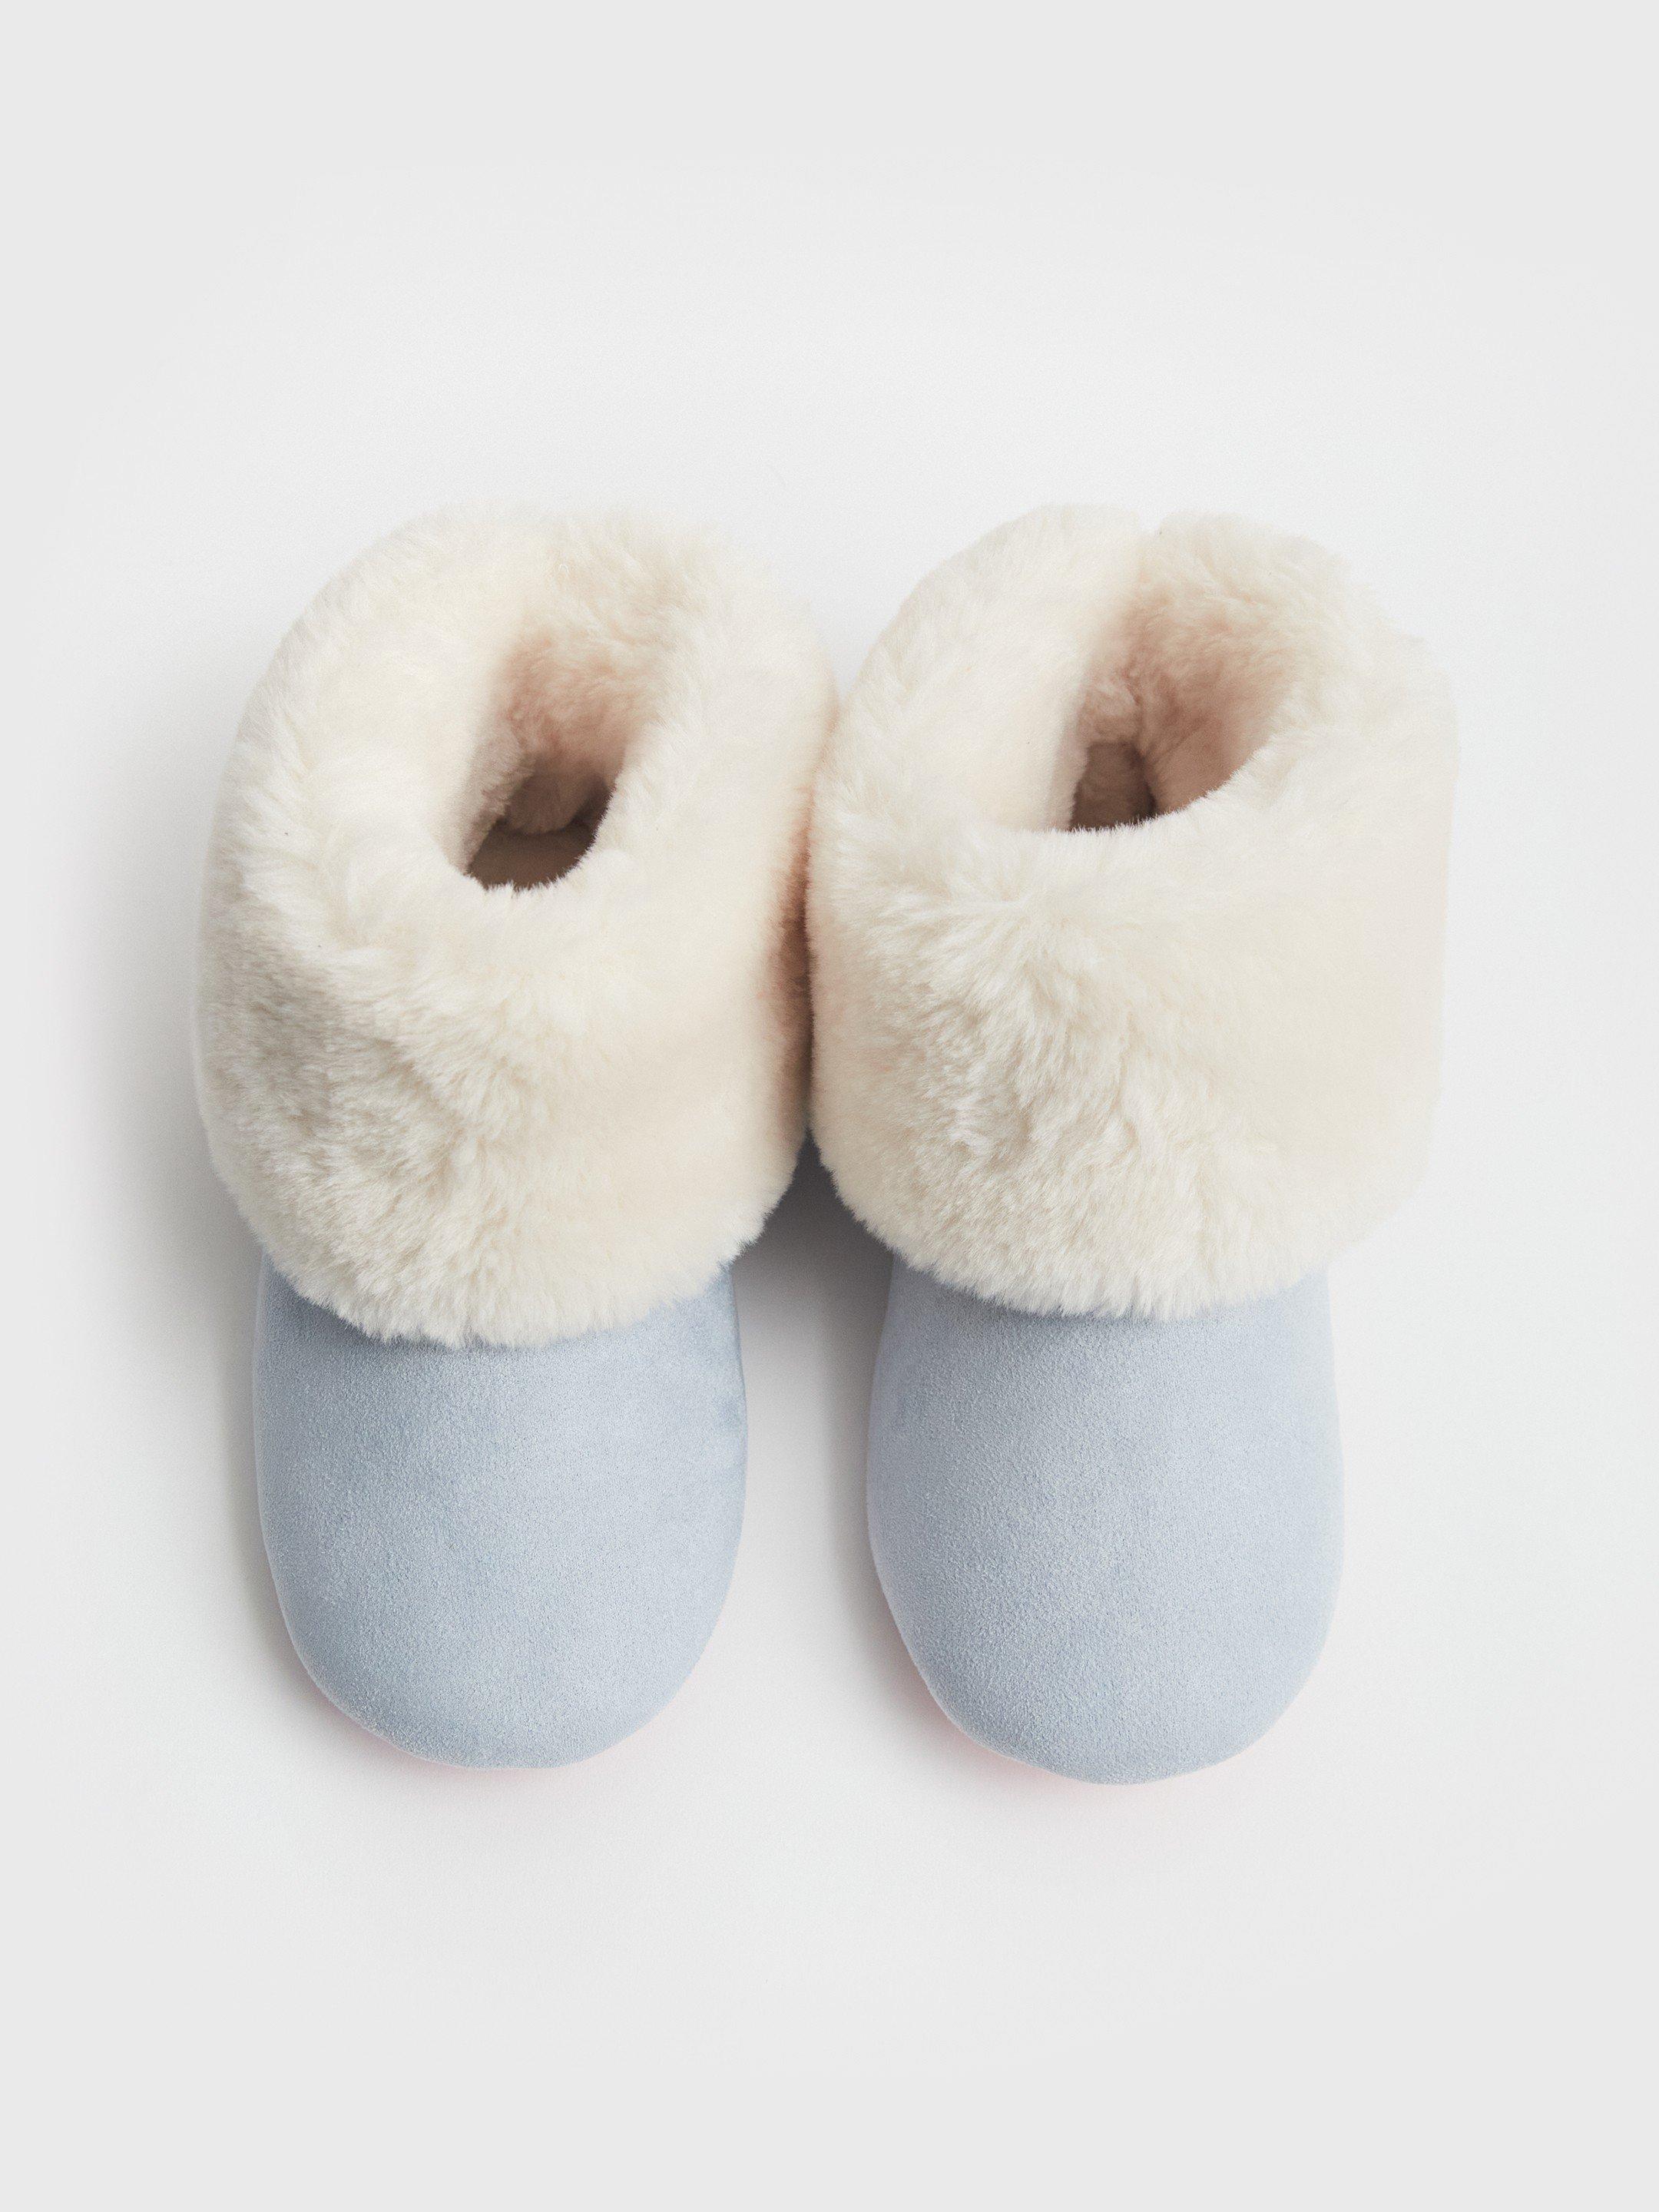 Slouchy Slipper Booties in LGT BLUE - FLAT DETAIL